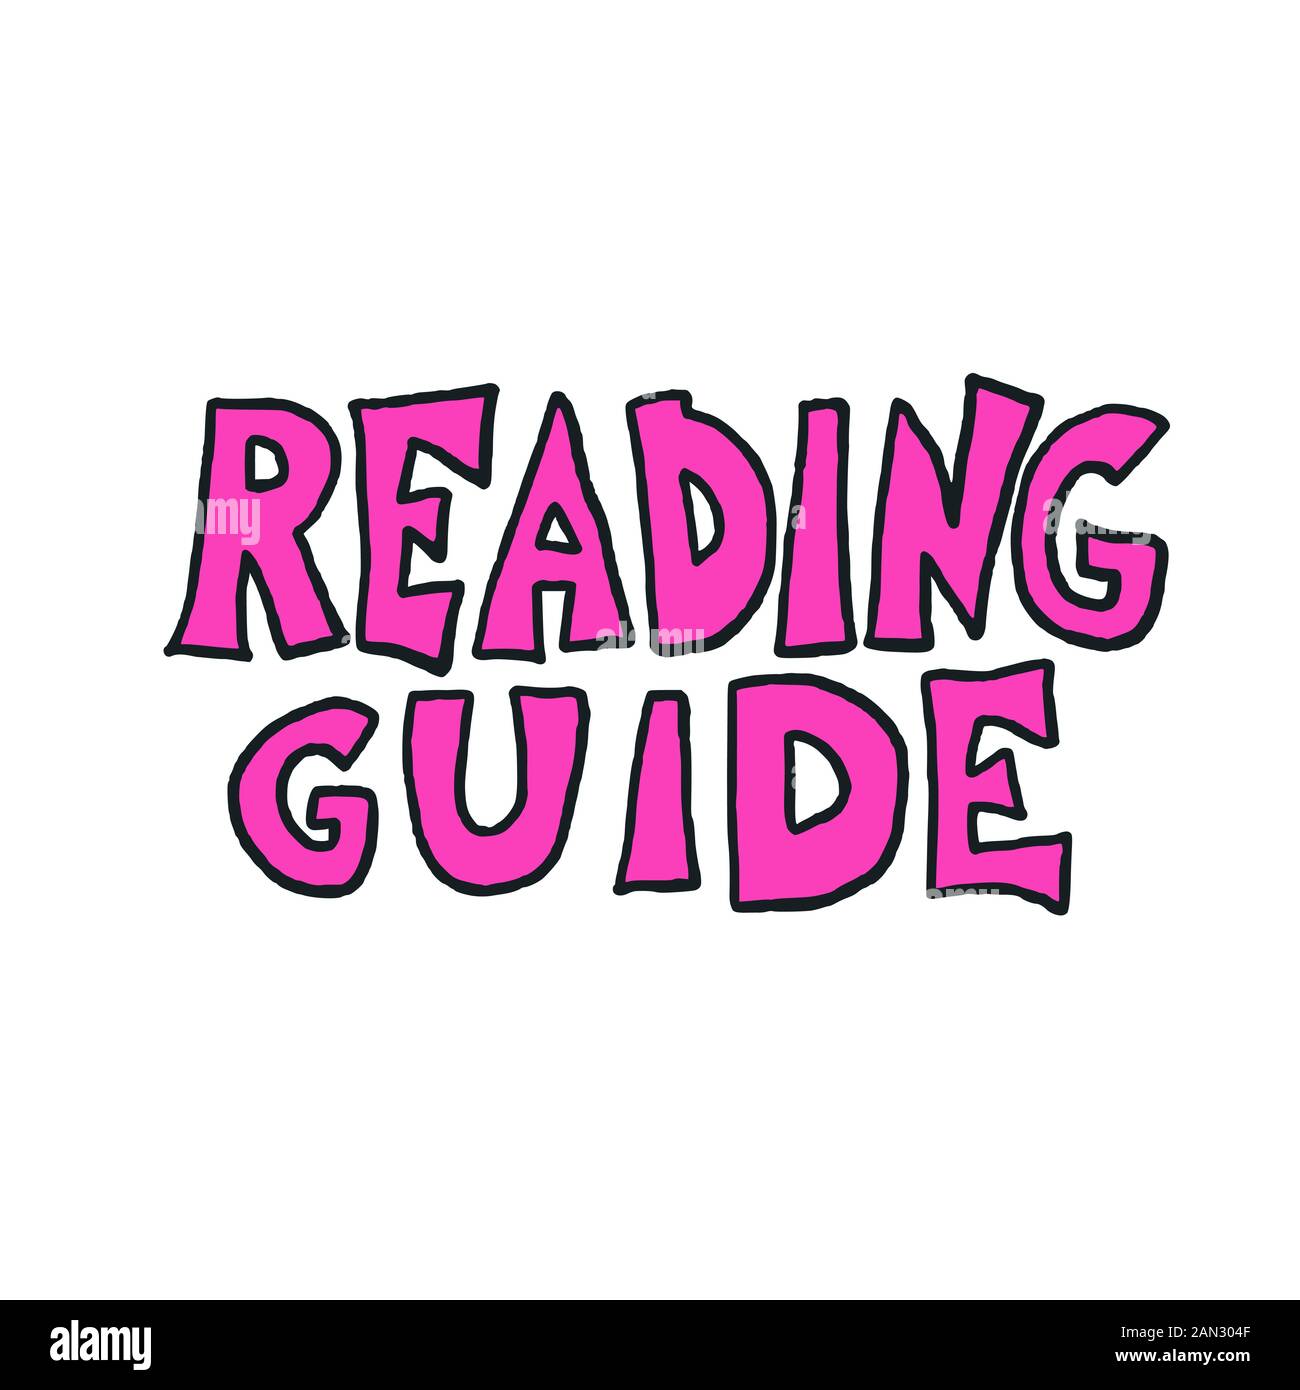 Reading guide phrase. Hand drawn quote about book. Text for bookstores, libraries, lists of bestsellers. Vector illustartion. Stock Vector